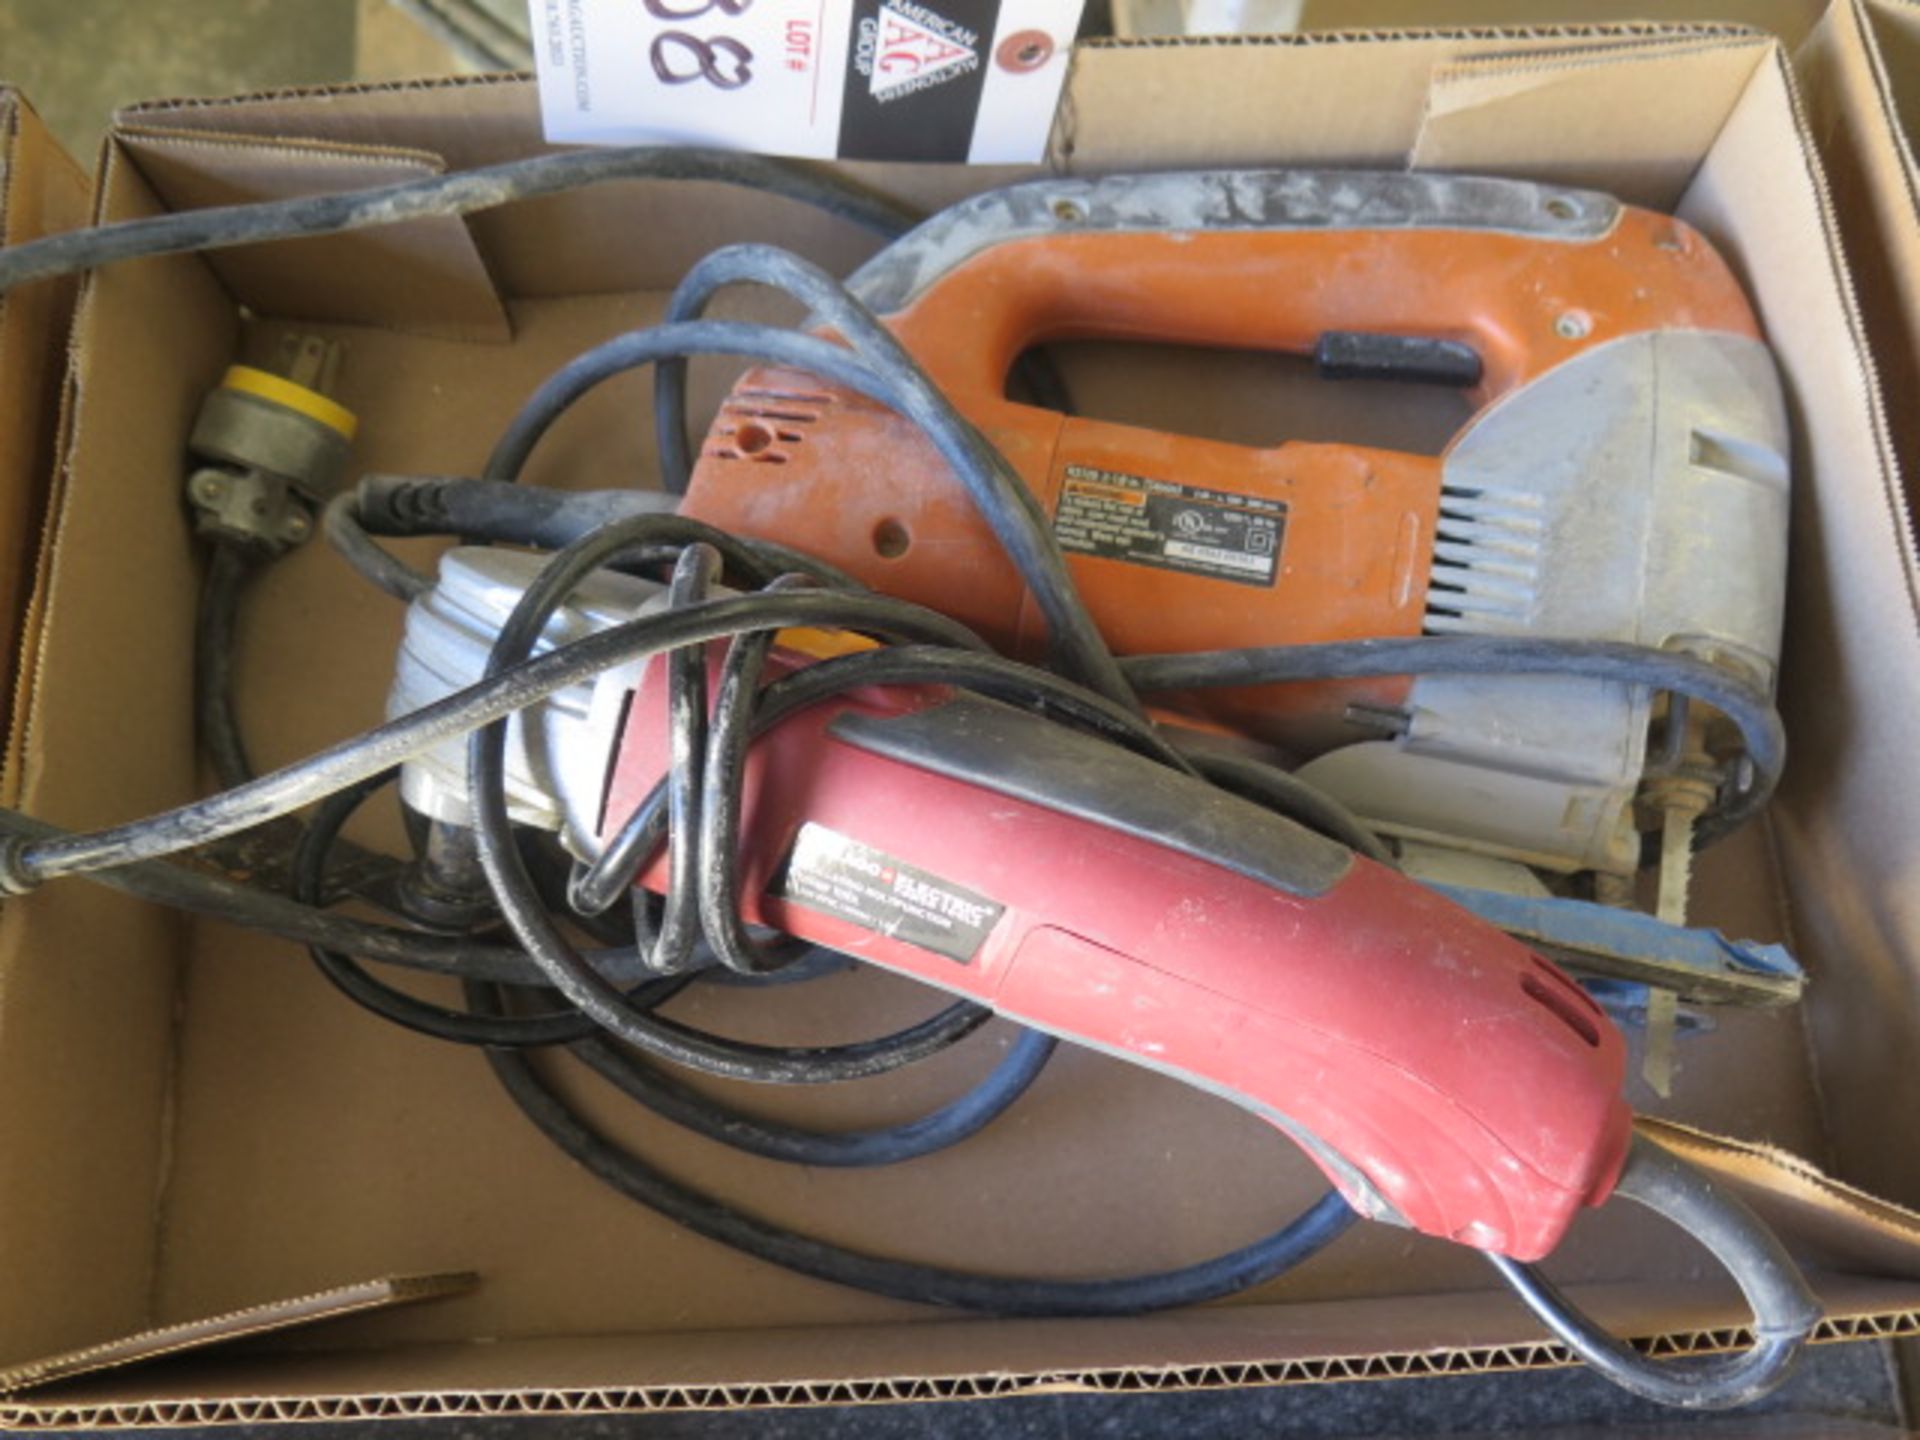 Ridgid Jig Saw and Chicago Multi-Function Power Tool (SOLD AS-IS - NO WARRANTY) - Image 2 of 4